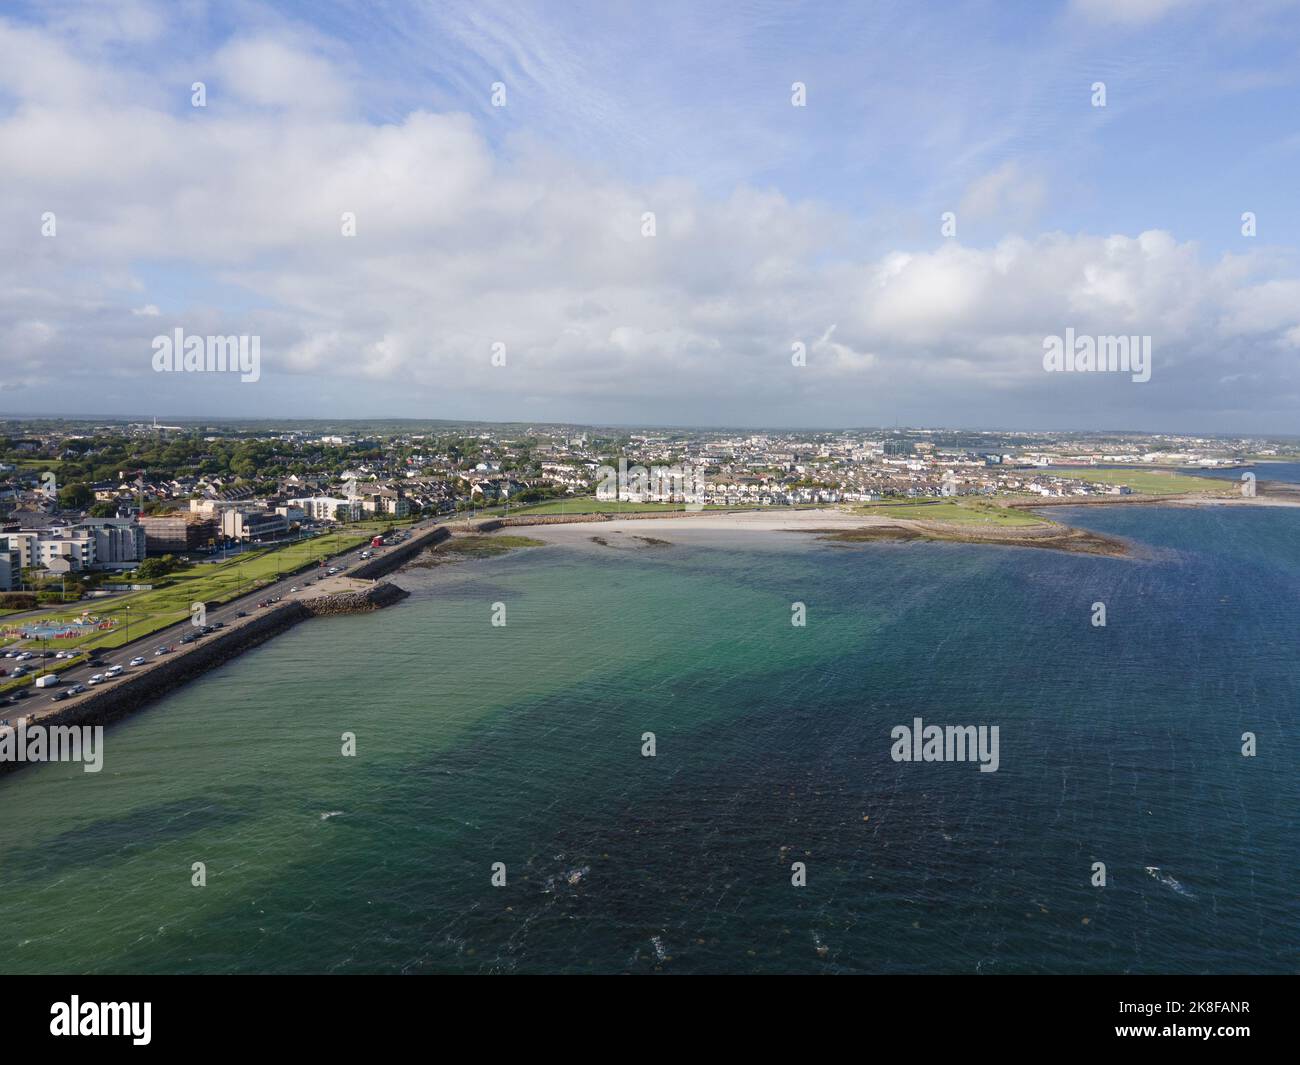 Ireland, Galway City - 05 21 2022: View from above of Galway City, second biggest city after Dublin in Republic of Ireland. Stock Photo